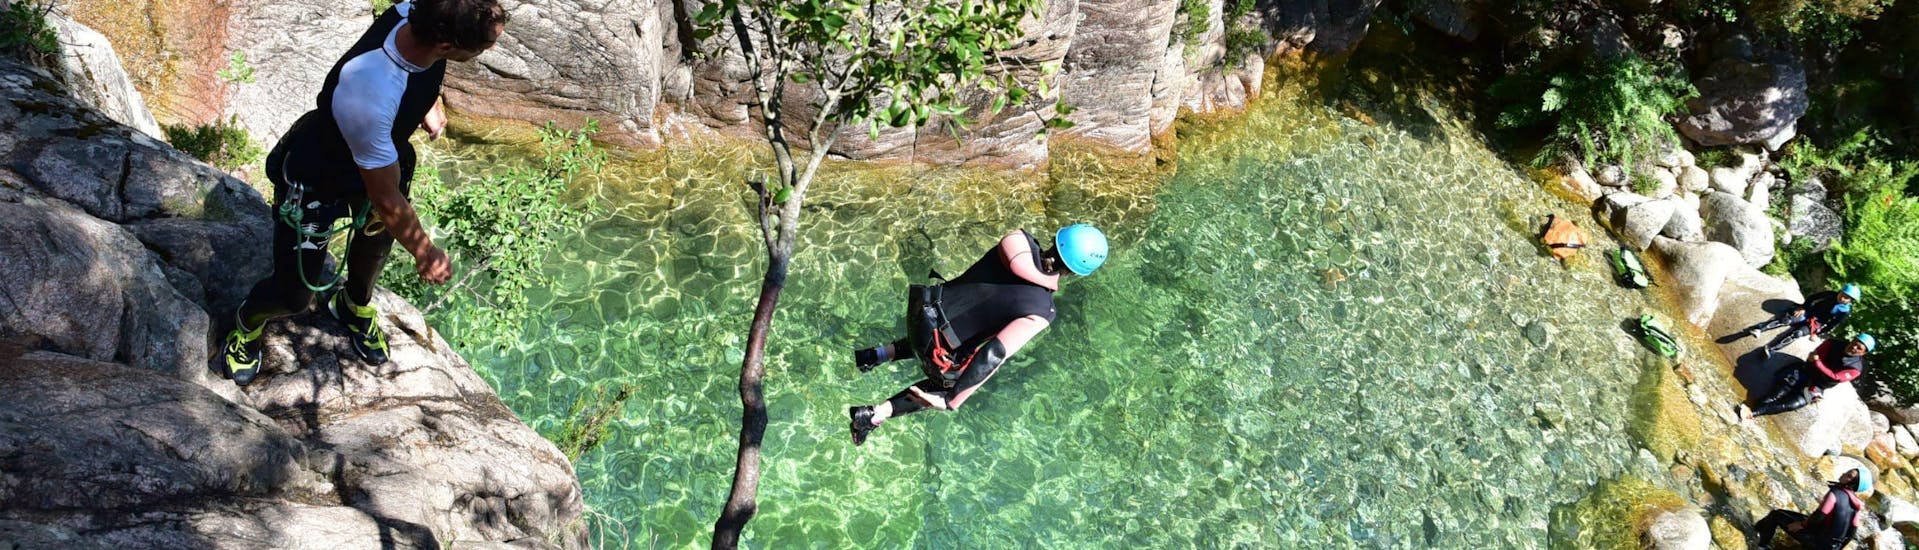 A man is jumping in a natural pool during a Private Canyoning in Vacca - Aquatic (12 ppl max) trip with Corsica Madness.